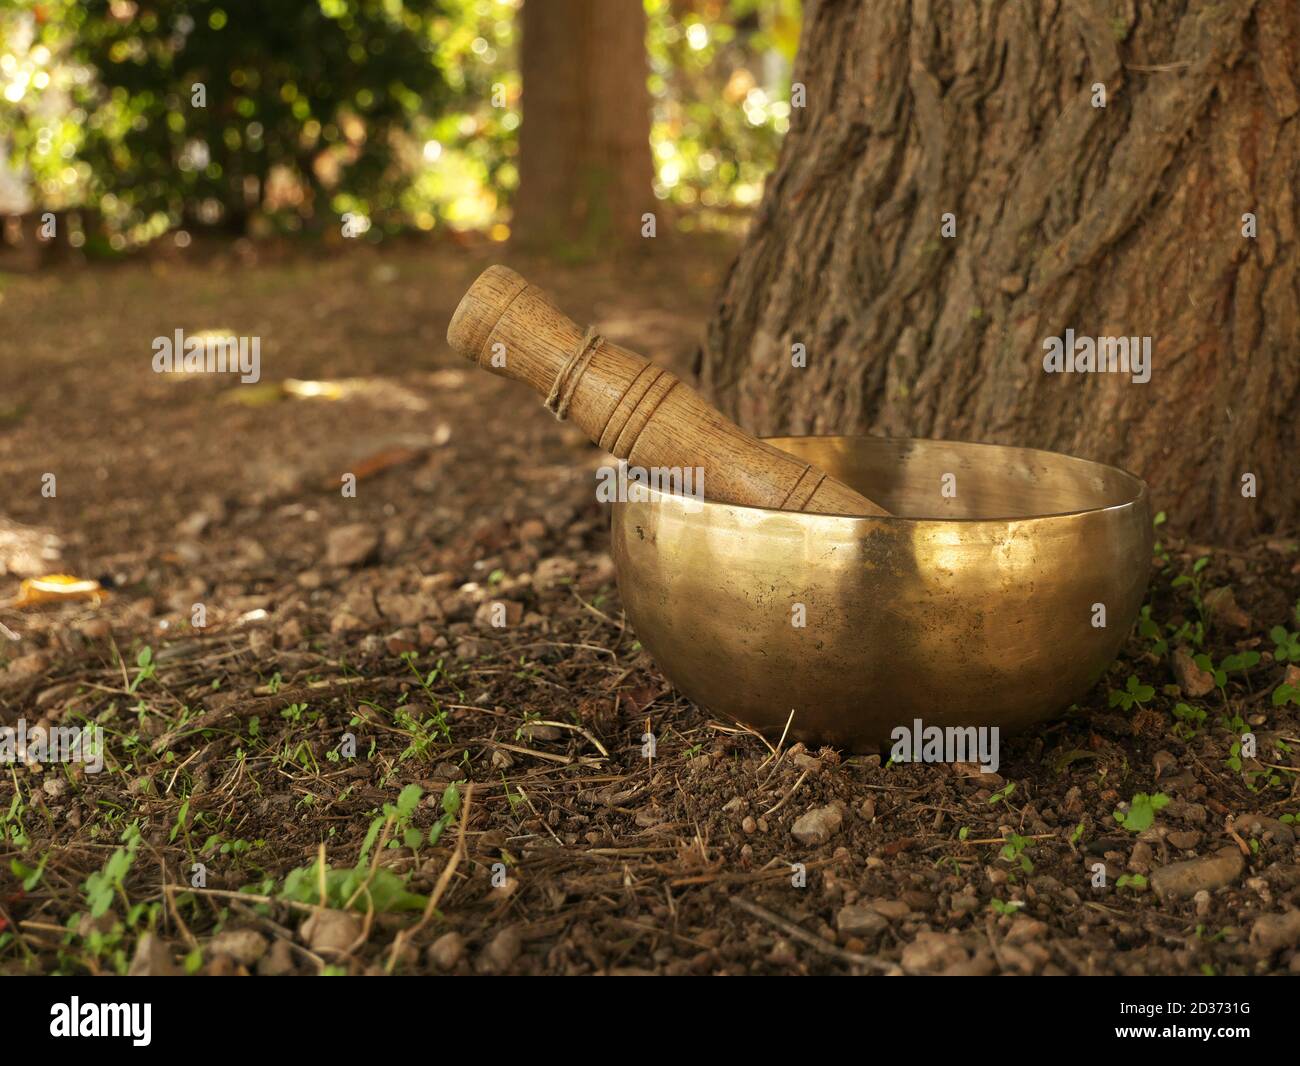 Singing bowl placed at the bottom of a tree trunk during the fall season Stock Photo